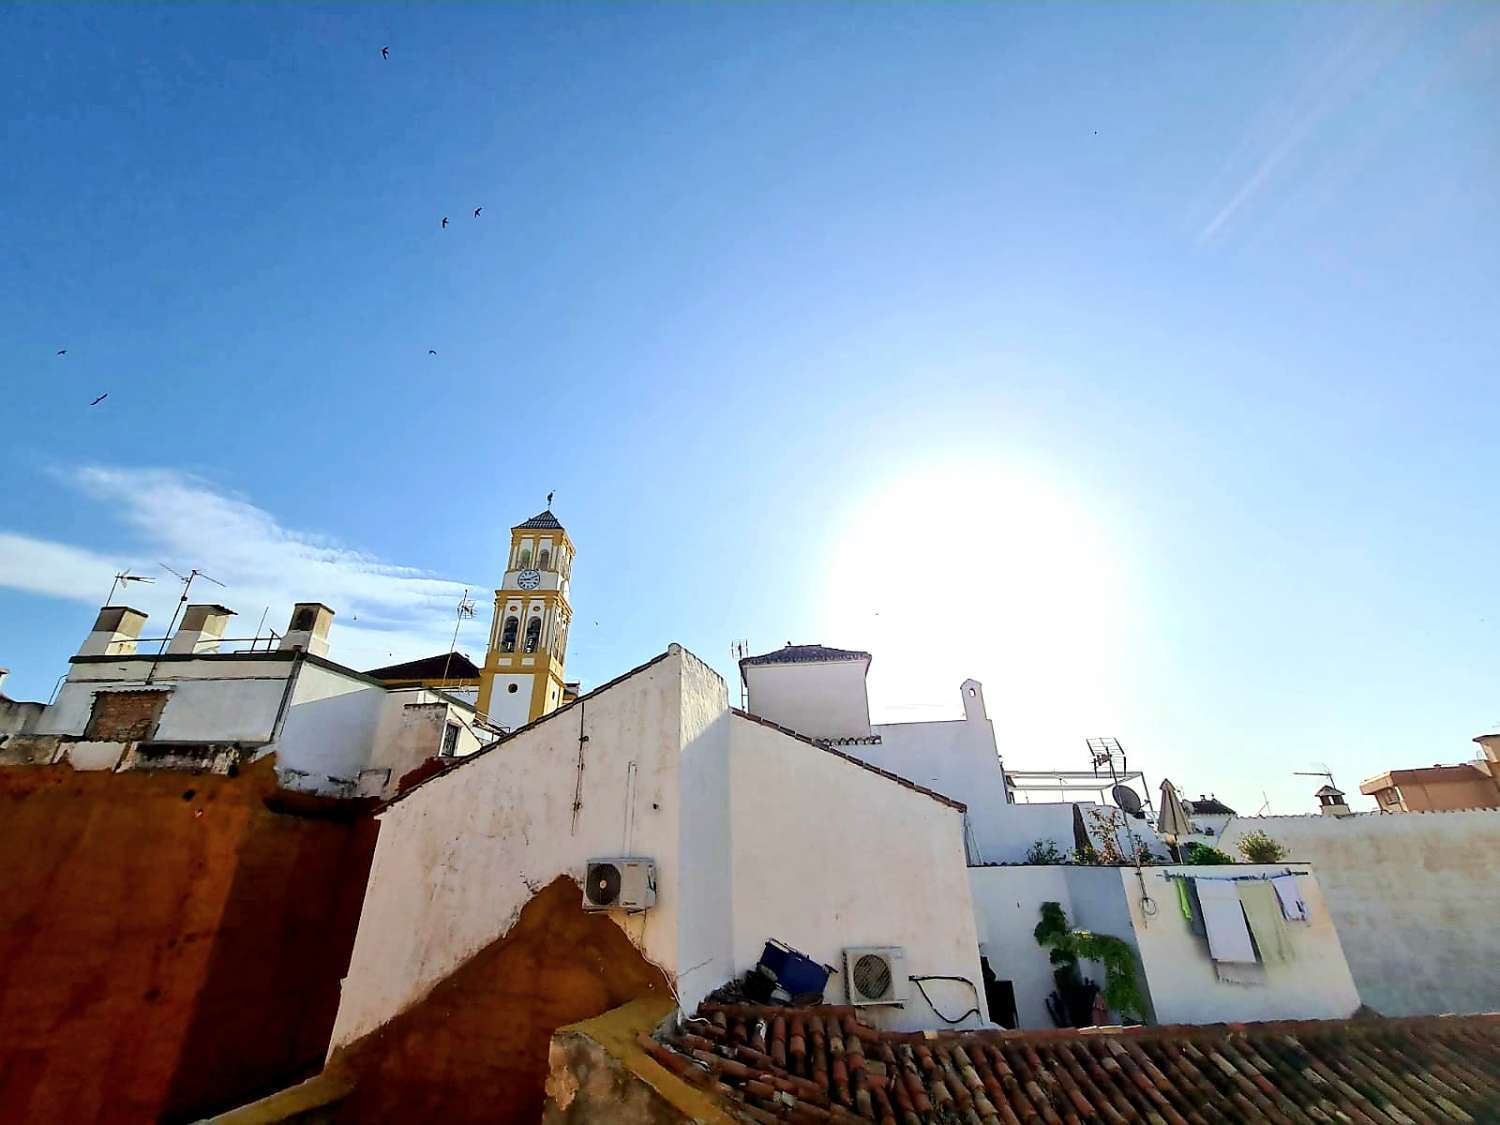 IDEAL INVESTORS!!! HOUSE IN OLD TOWN MARBELLA!!!